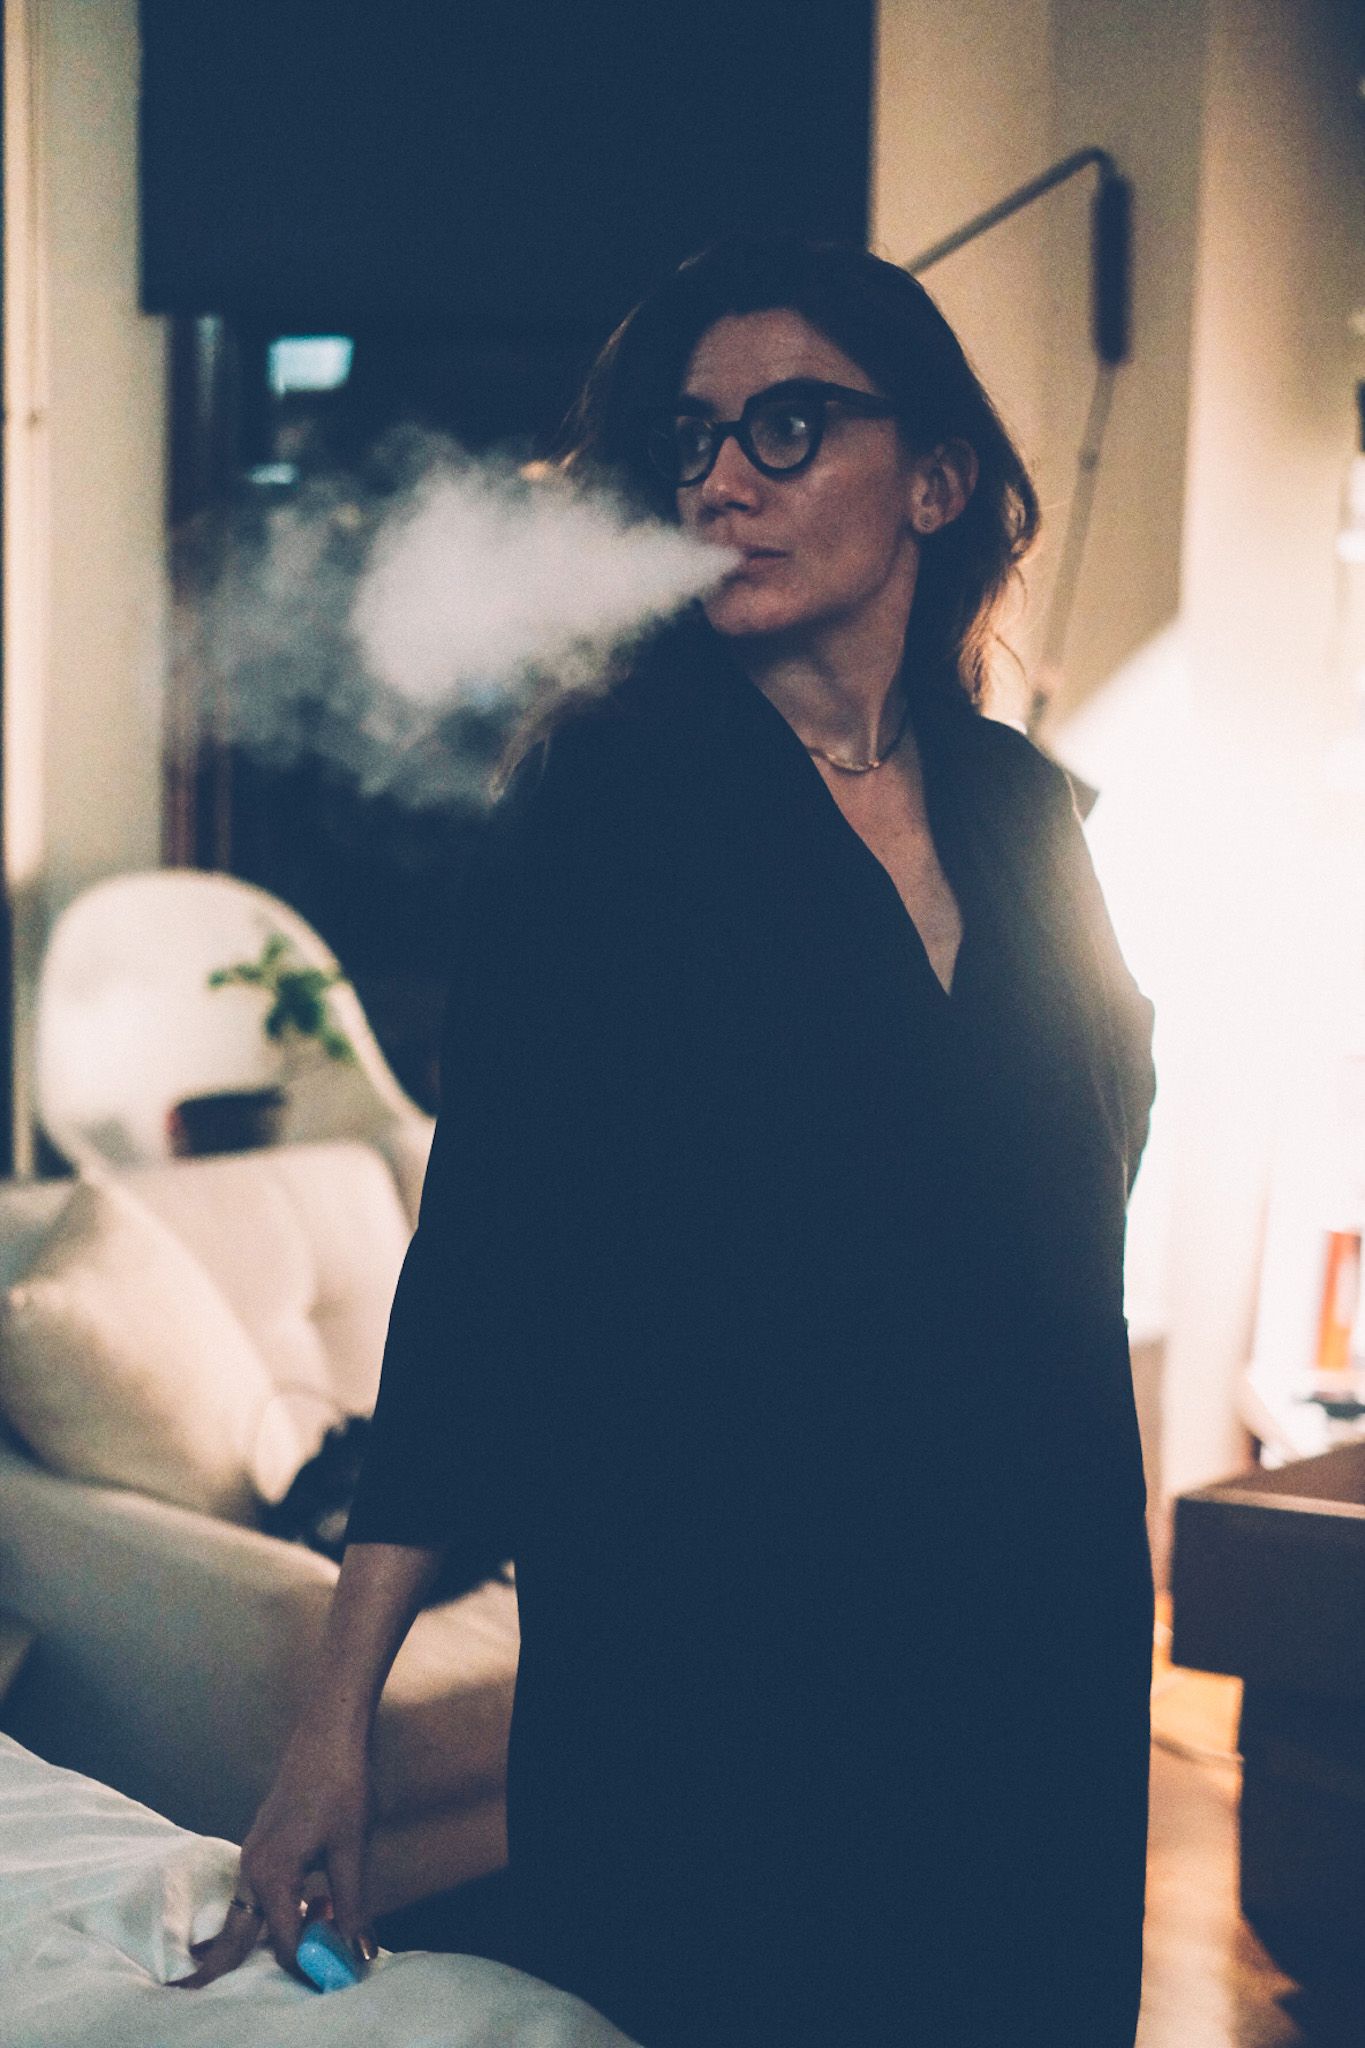 A woman stands in her apartment, looking over her shoulder as she blows smoke out of her mouth.